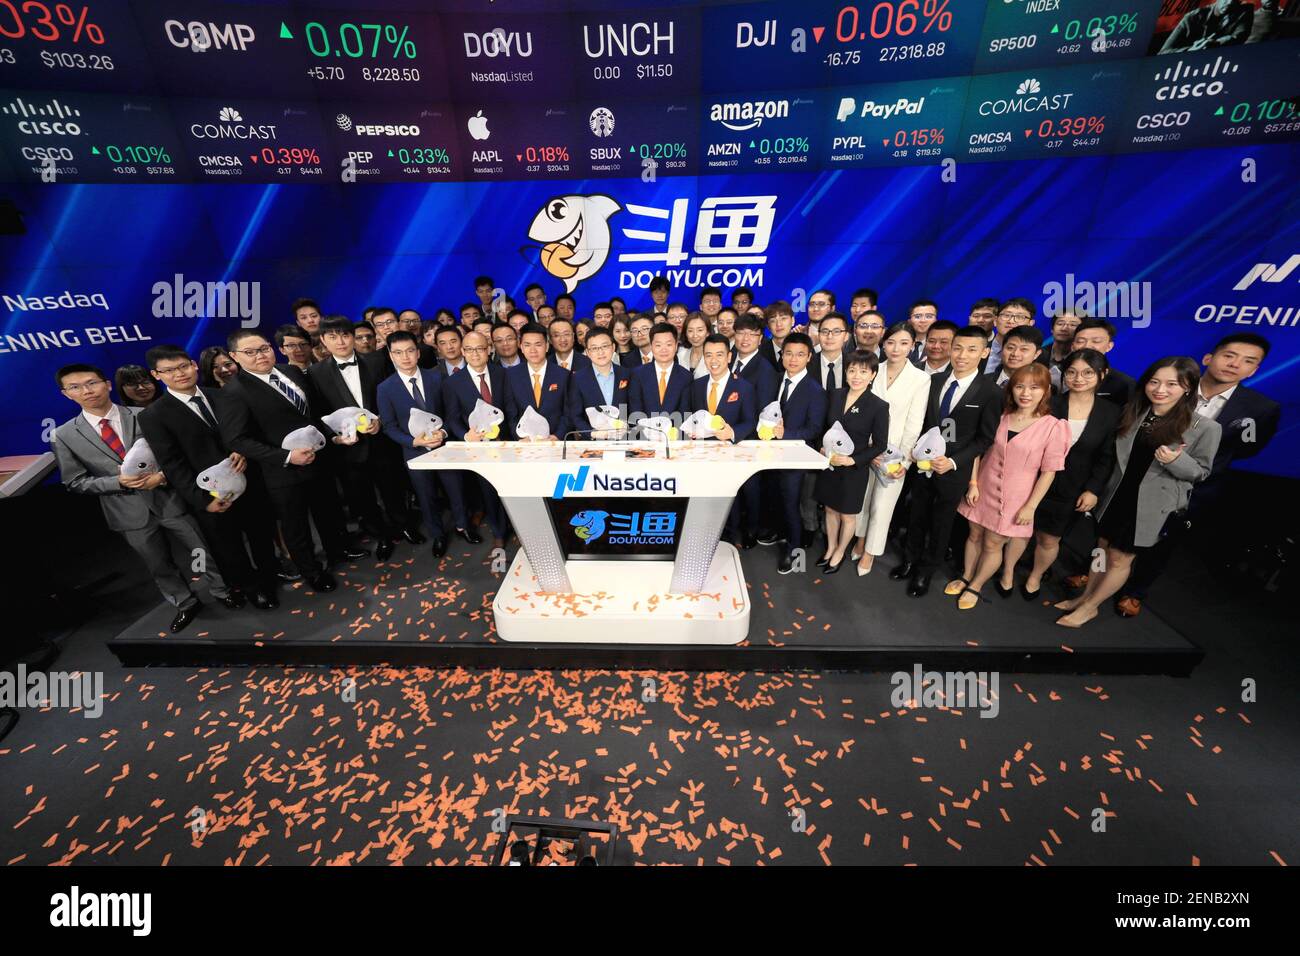 In this handout image, Chen Shaojie, center left, and Zhang Wenming, center right, co-founders and CEO of DouYu International Holdings Limited, pose on the Nasdaq stock exchange in Times Square as DouYu